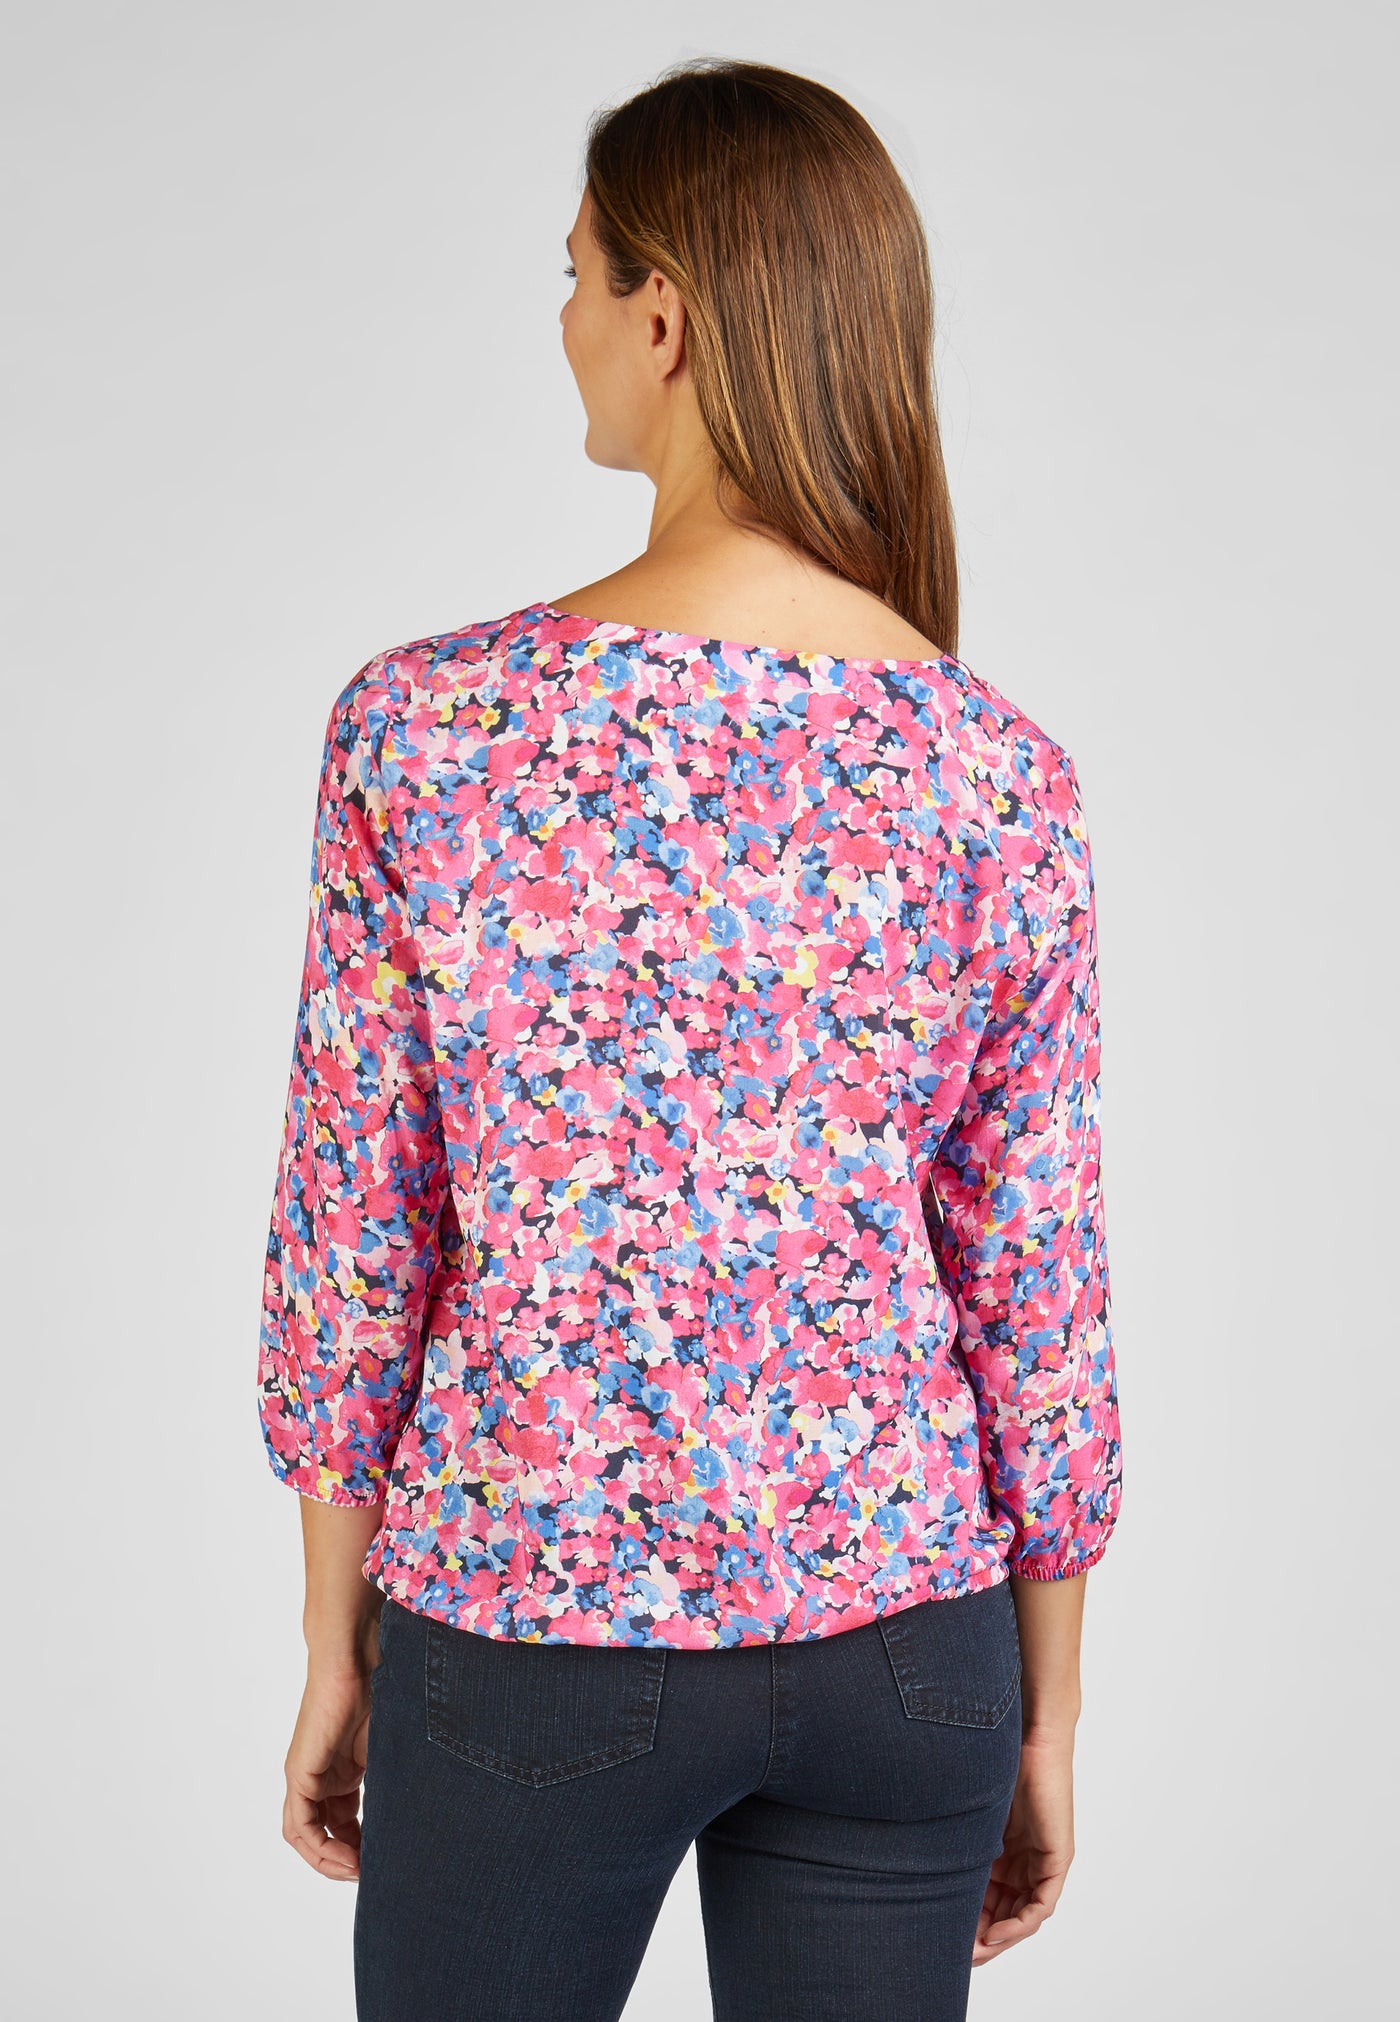 Floral Print Top With Mini V Neck & Elasticated Bottom